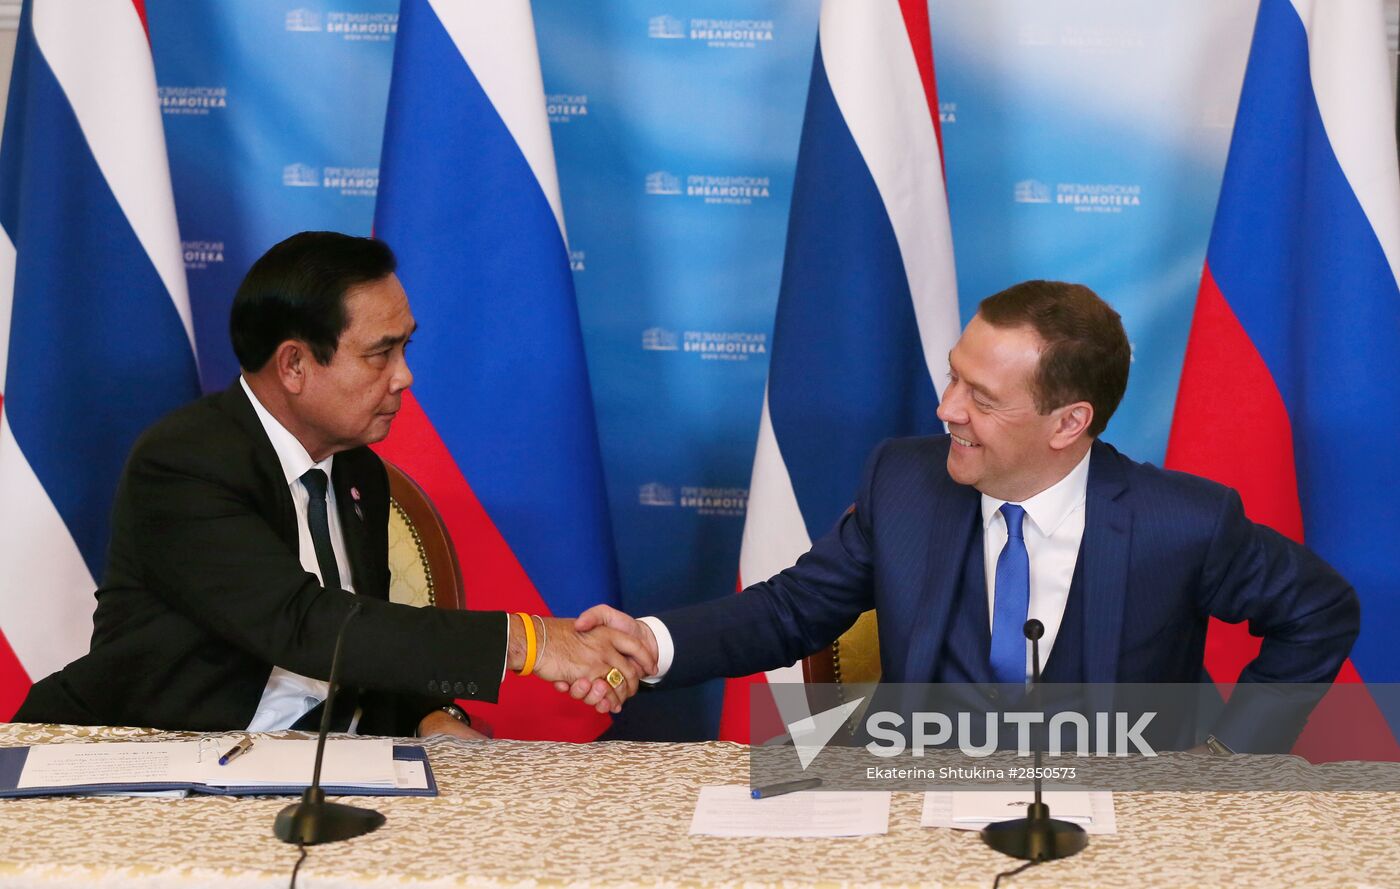 Russian Prime Minister Dmitry Medvedev meets with his Thai counterpart Prayut Chan-o-cha